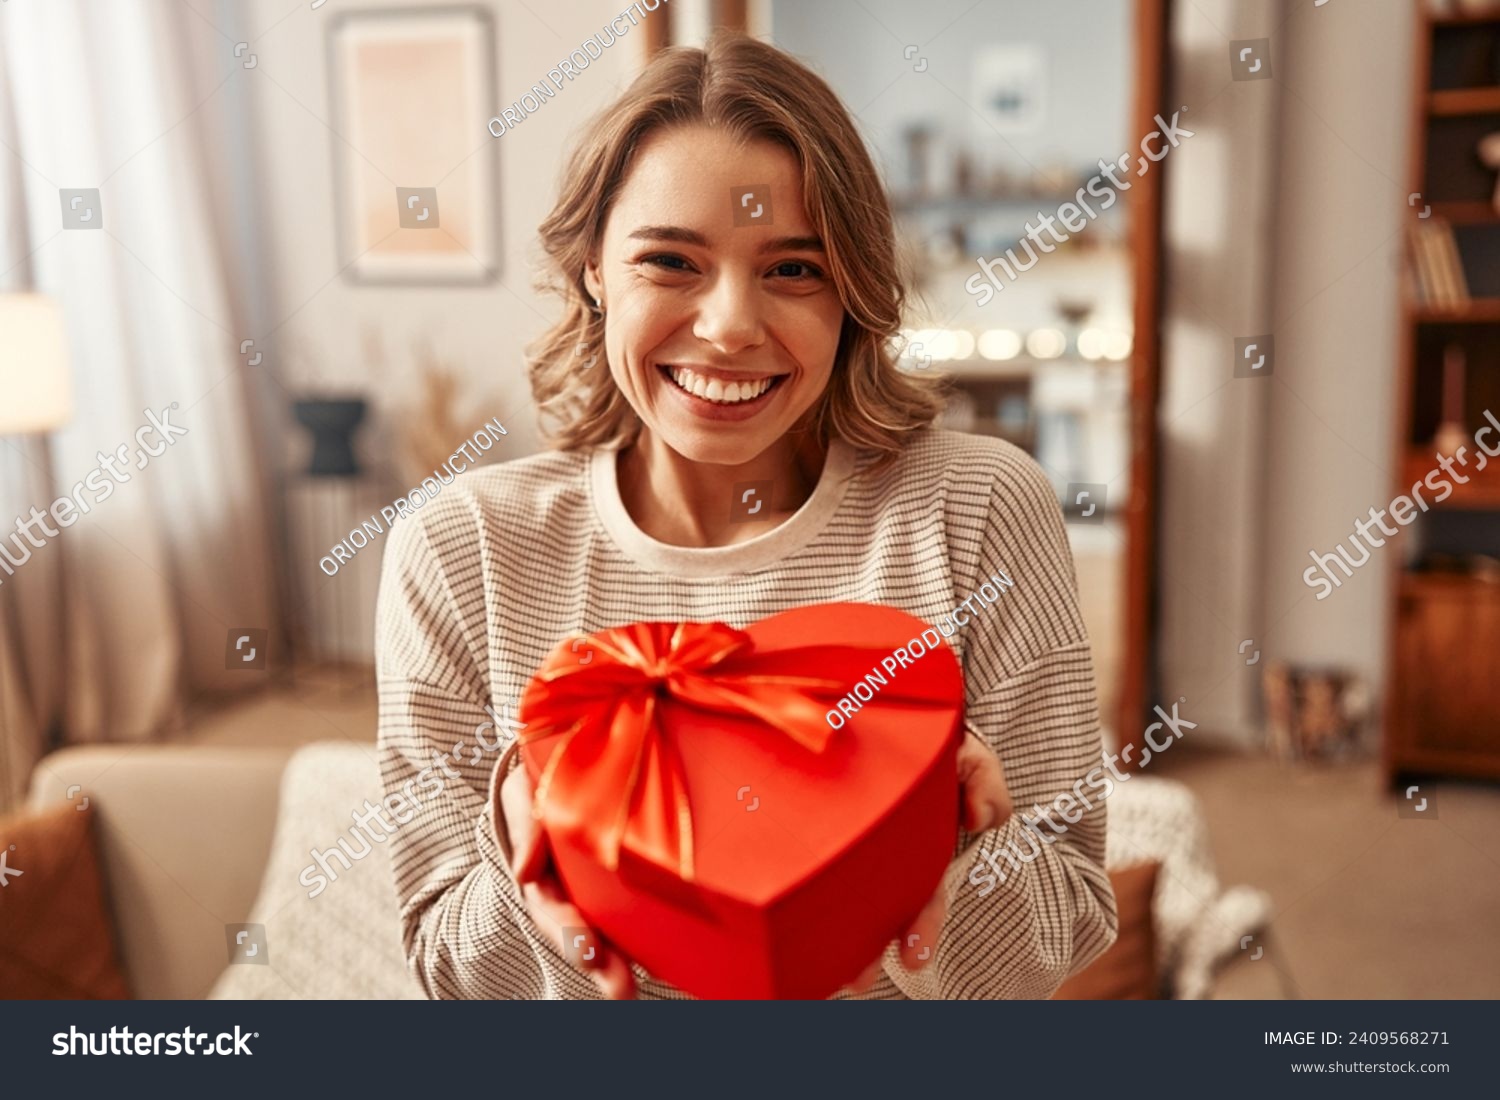 Happy Valentine's Day. Happy smiling woman holding red heart shaped gift box with bow in living room at home. #2409568271